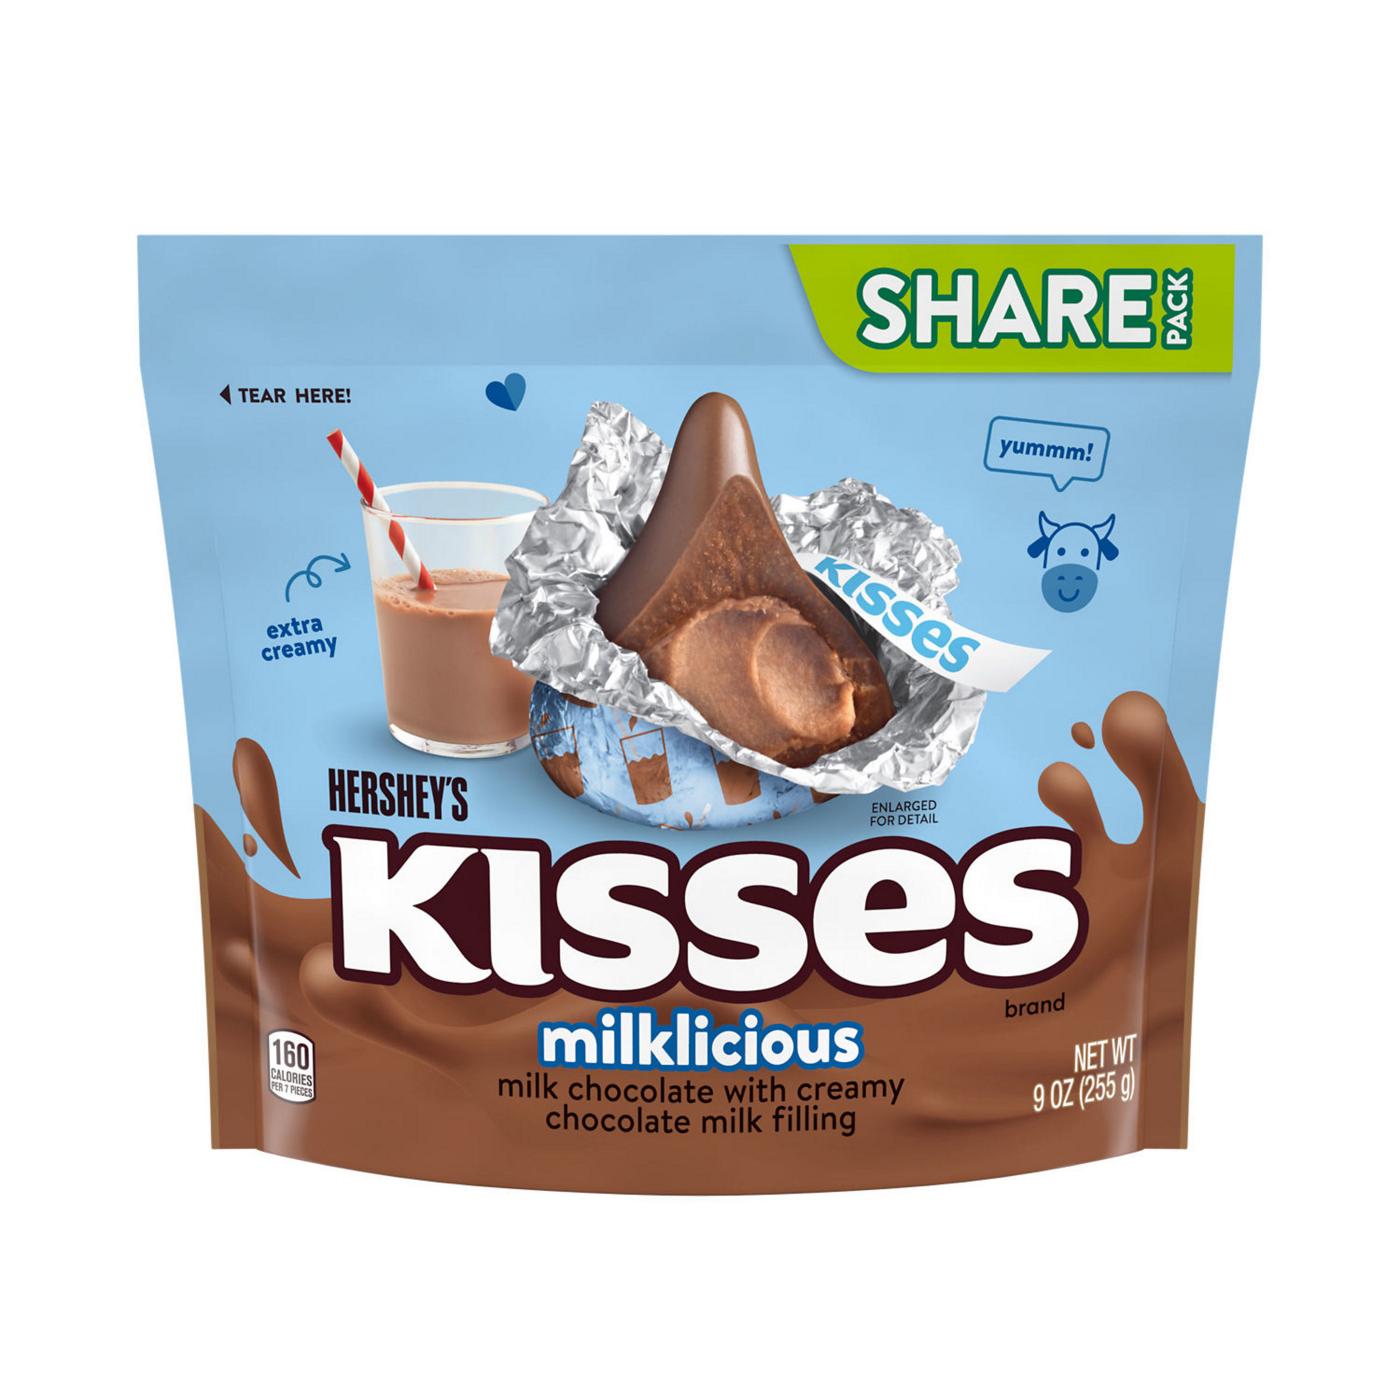 Hershey's Kisses Milklicious Milk Chocolate Candy - Share Pack; image 1 of 7